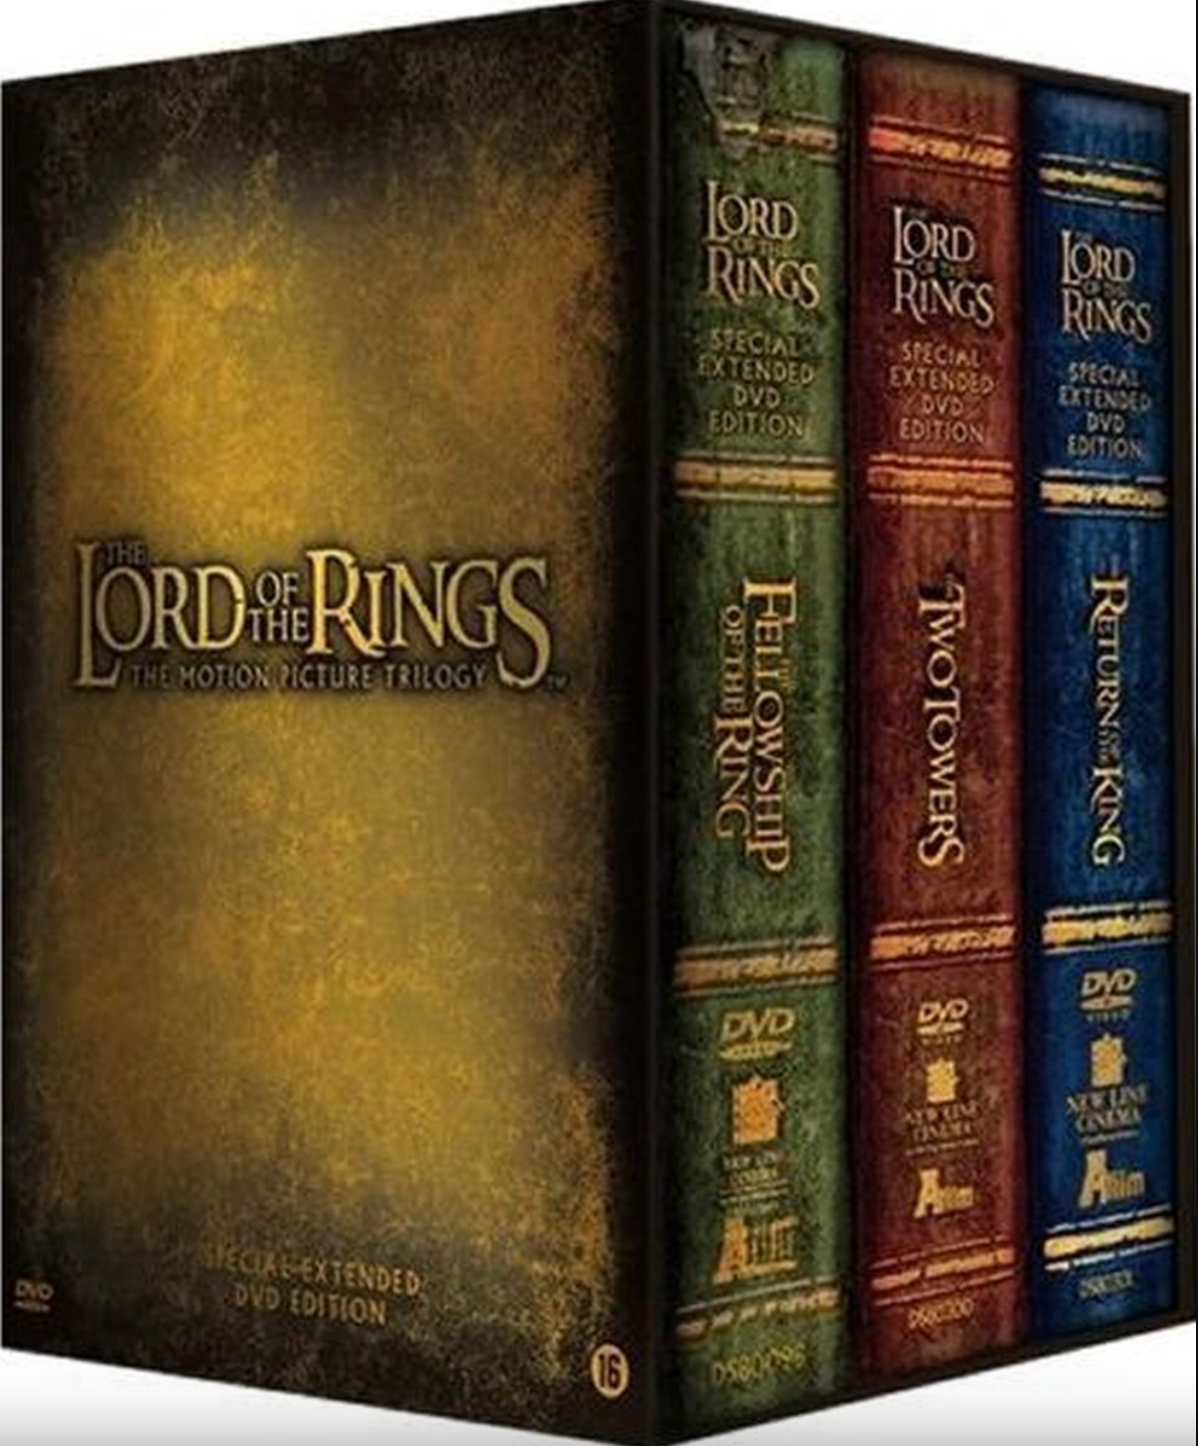 All 3 Lord of the Rings Extended Edition DVD Gift Sets + Free Documentary  DVD